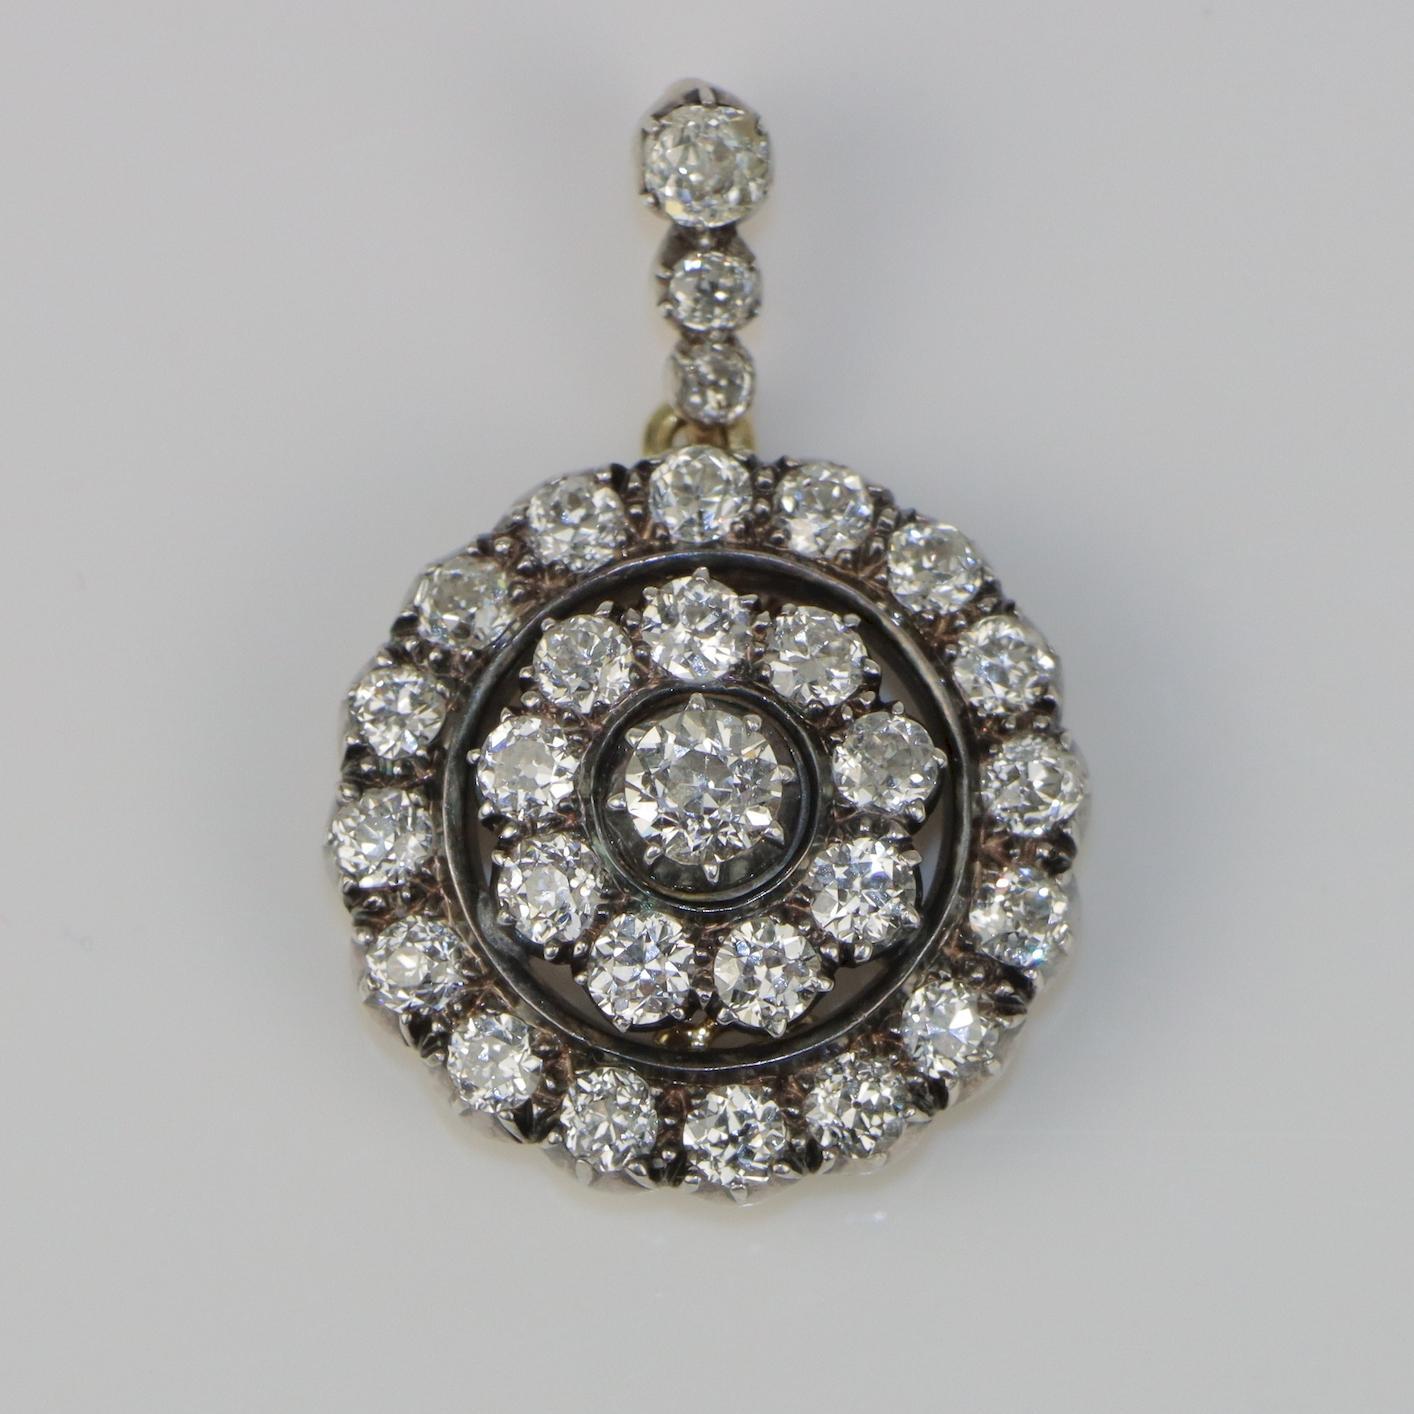 Antique Convertible Platinum & 18K Gold 4.70 Carat Diamond Pendant Brooch 

A Fine example of a Antique Platinum & 18K Gold Diamond Pendant / Brooch - The pendant is convertable and can be converted to a brooch pin with a screw-attachment as shown